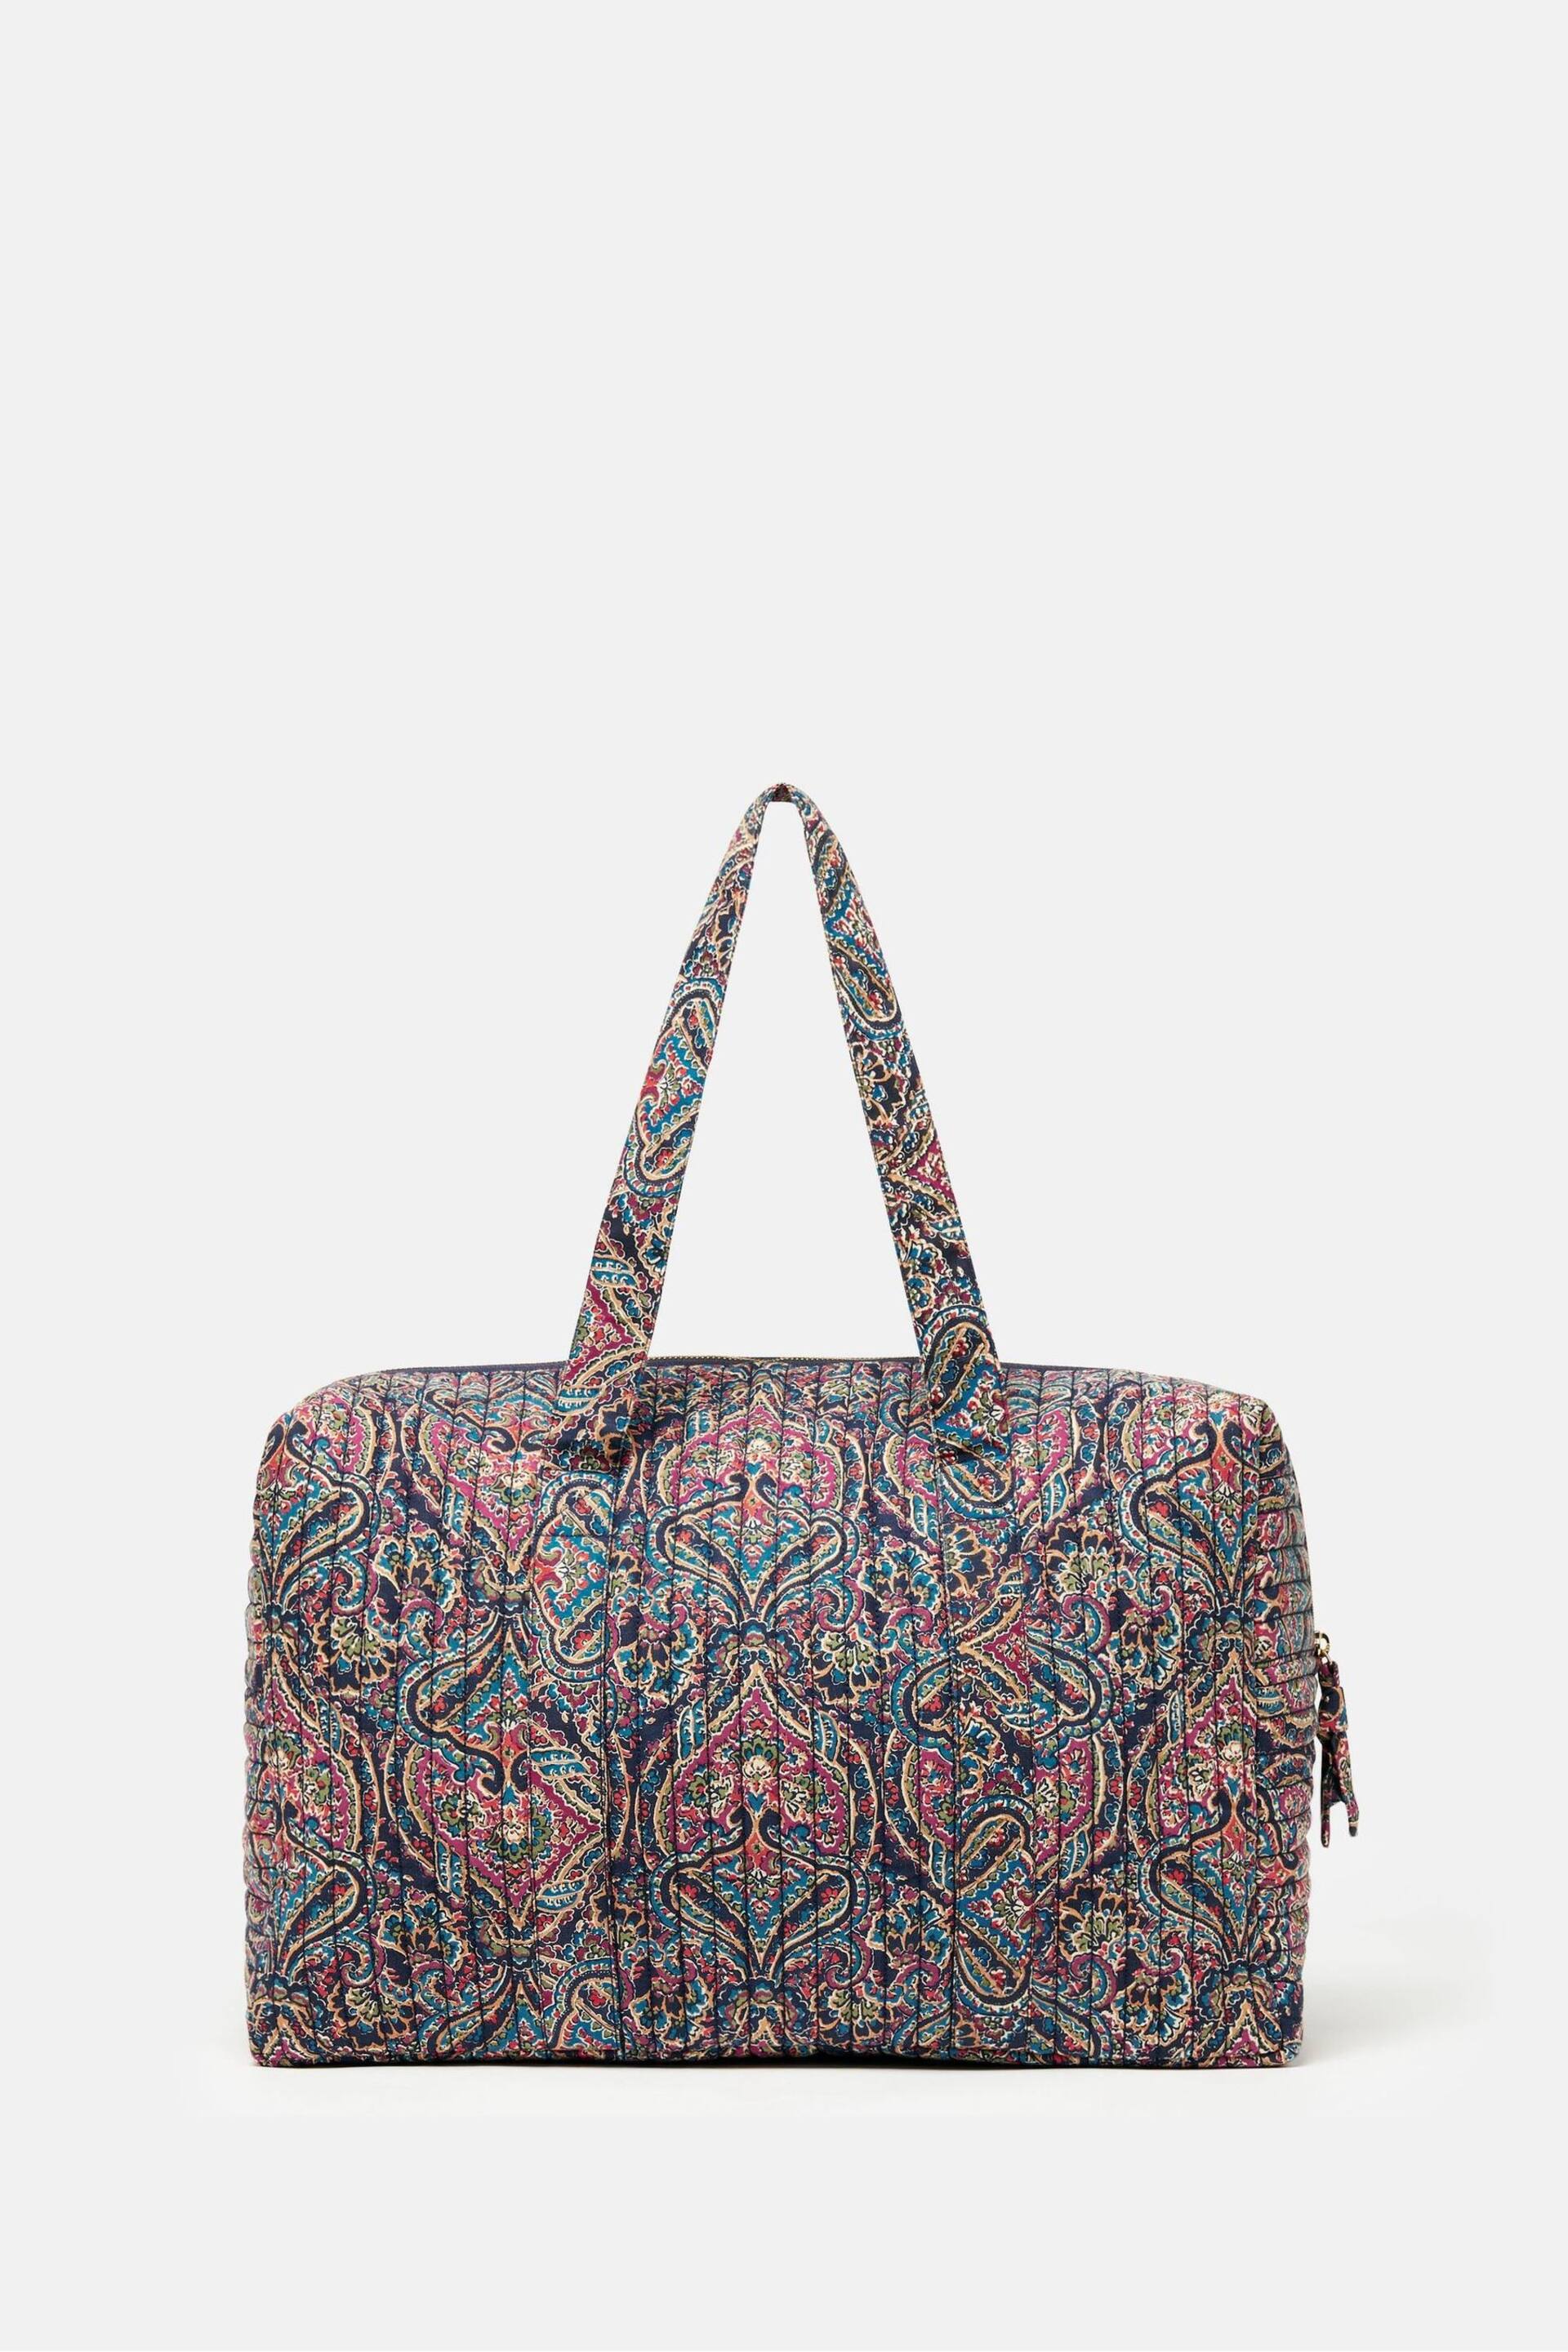 Joules Dolly Paisley Print Weekend Bag - Image 5 of 8